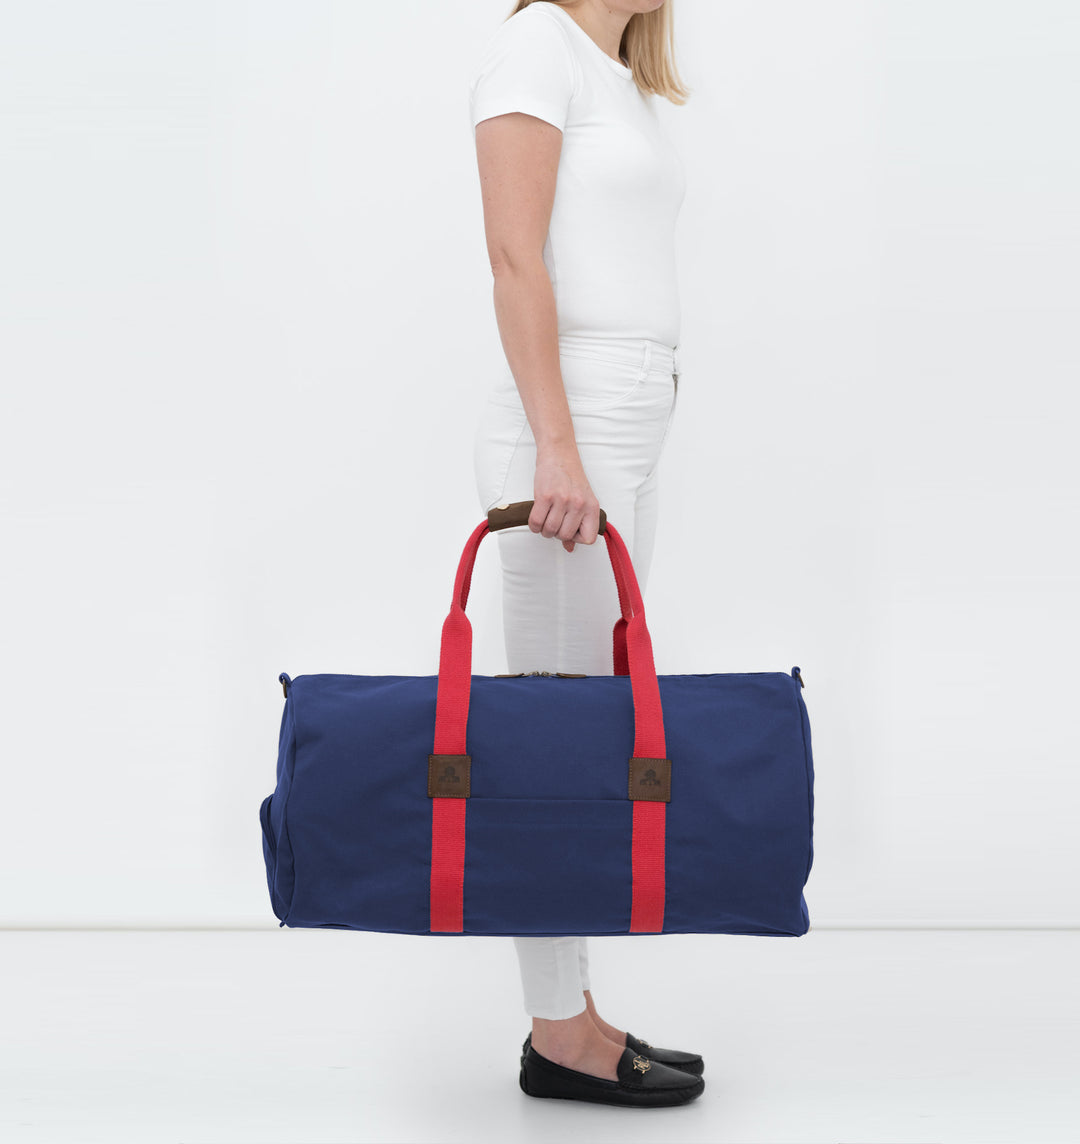 Duffle bag -L- NAVY with red strap